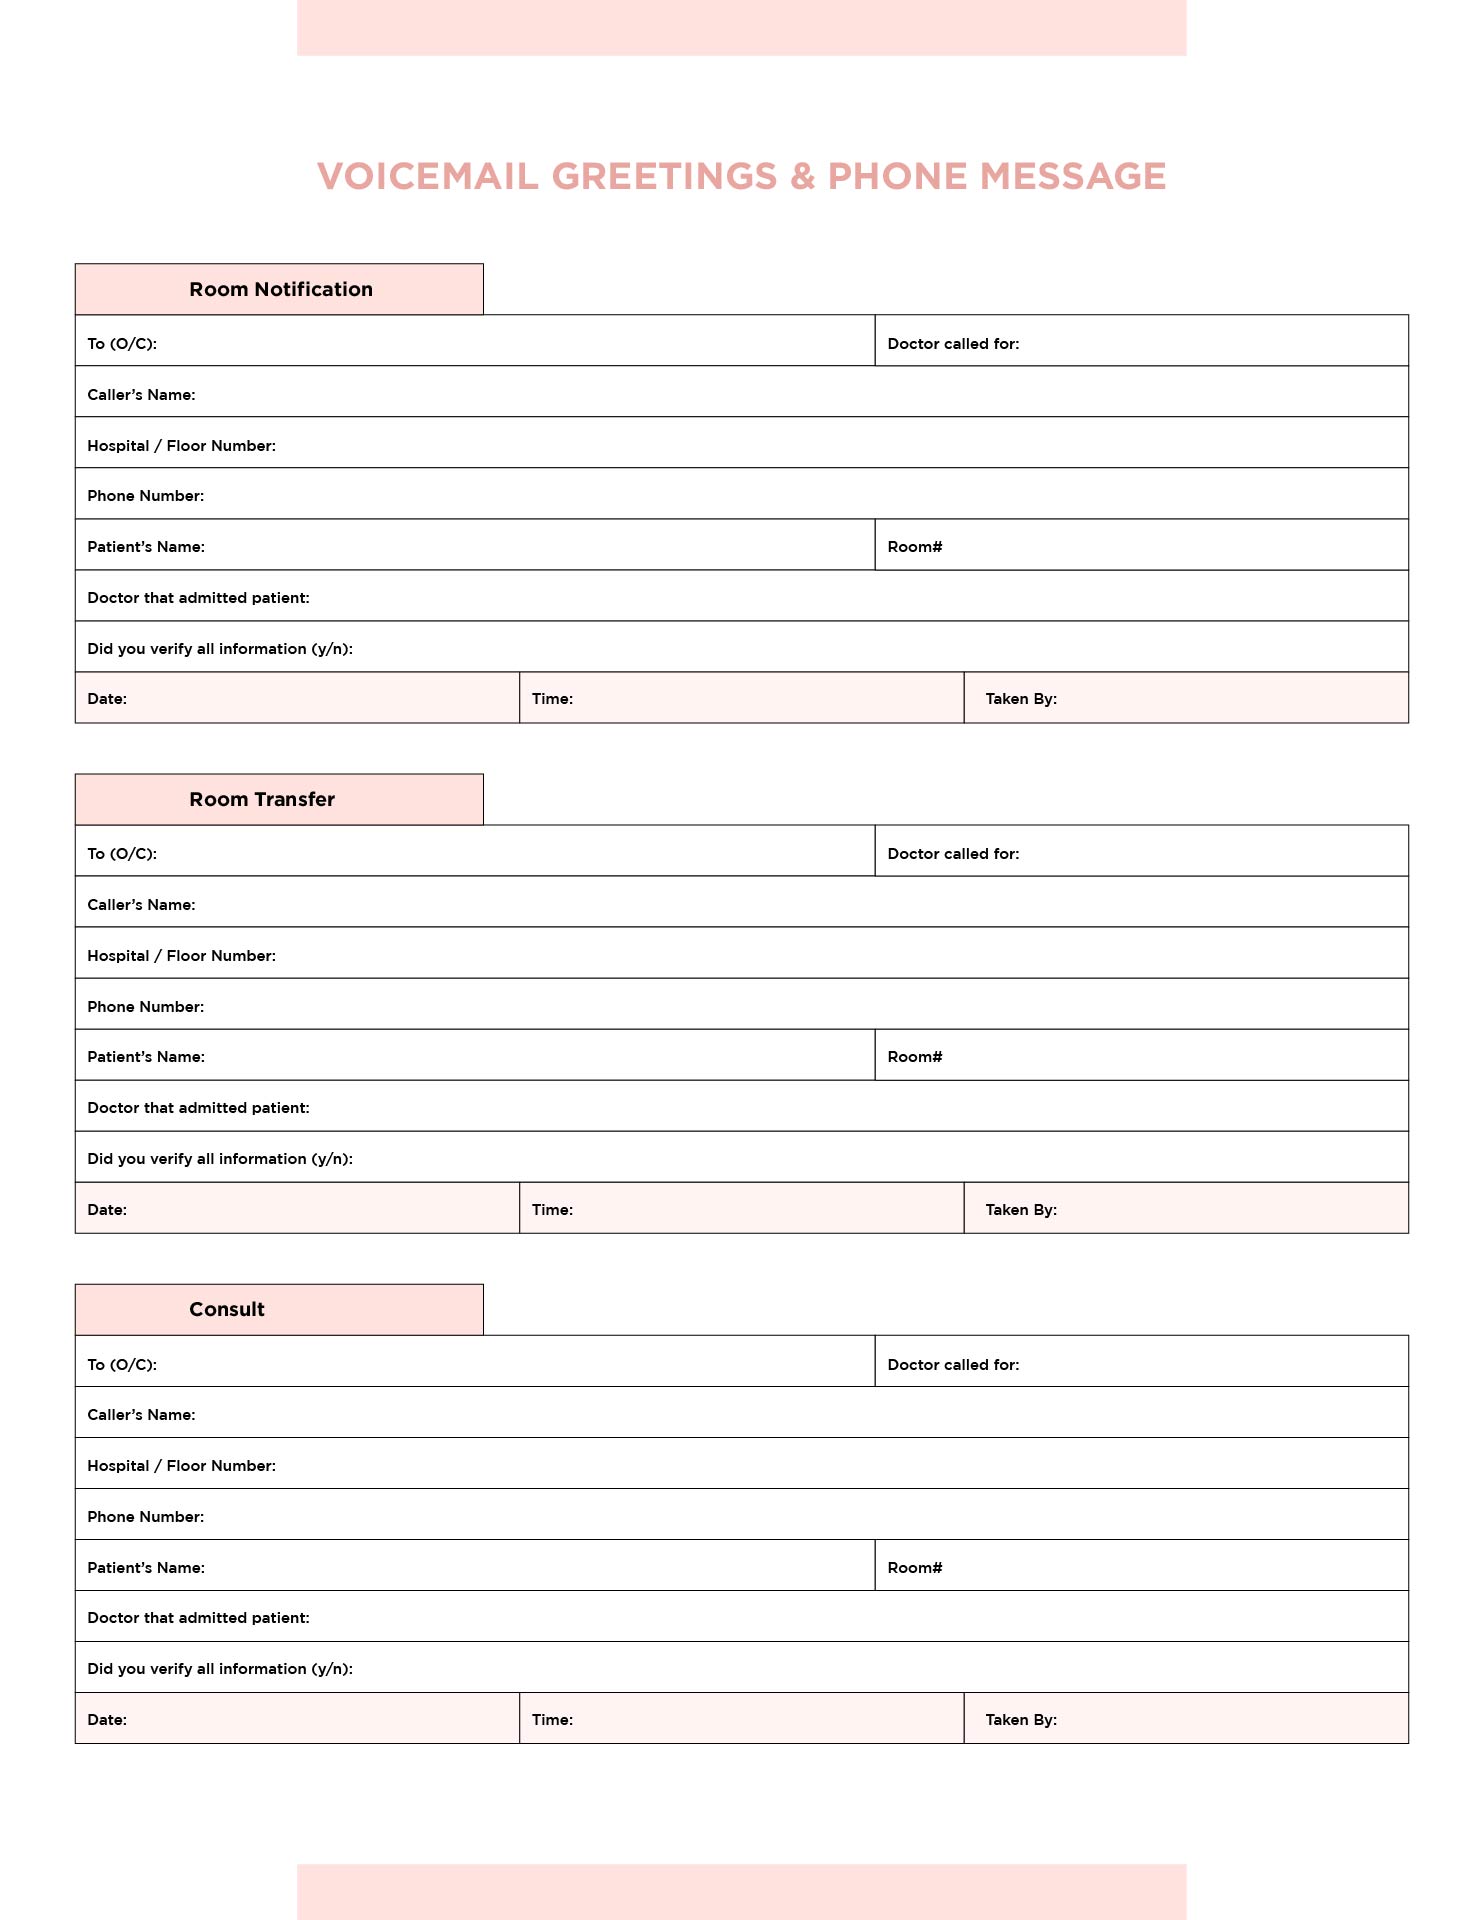 Printable Voicemail Greetings & Phone Message Templates